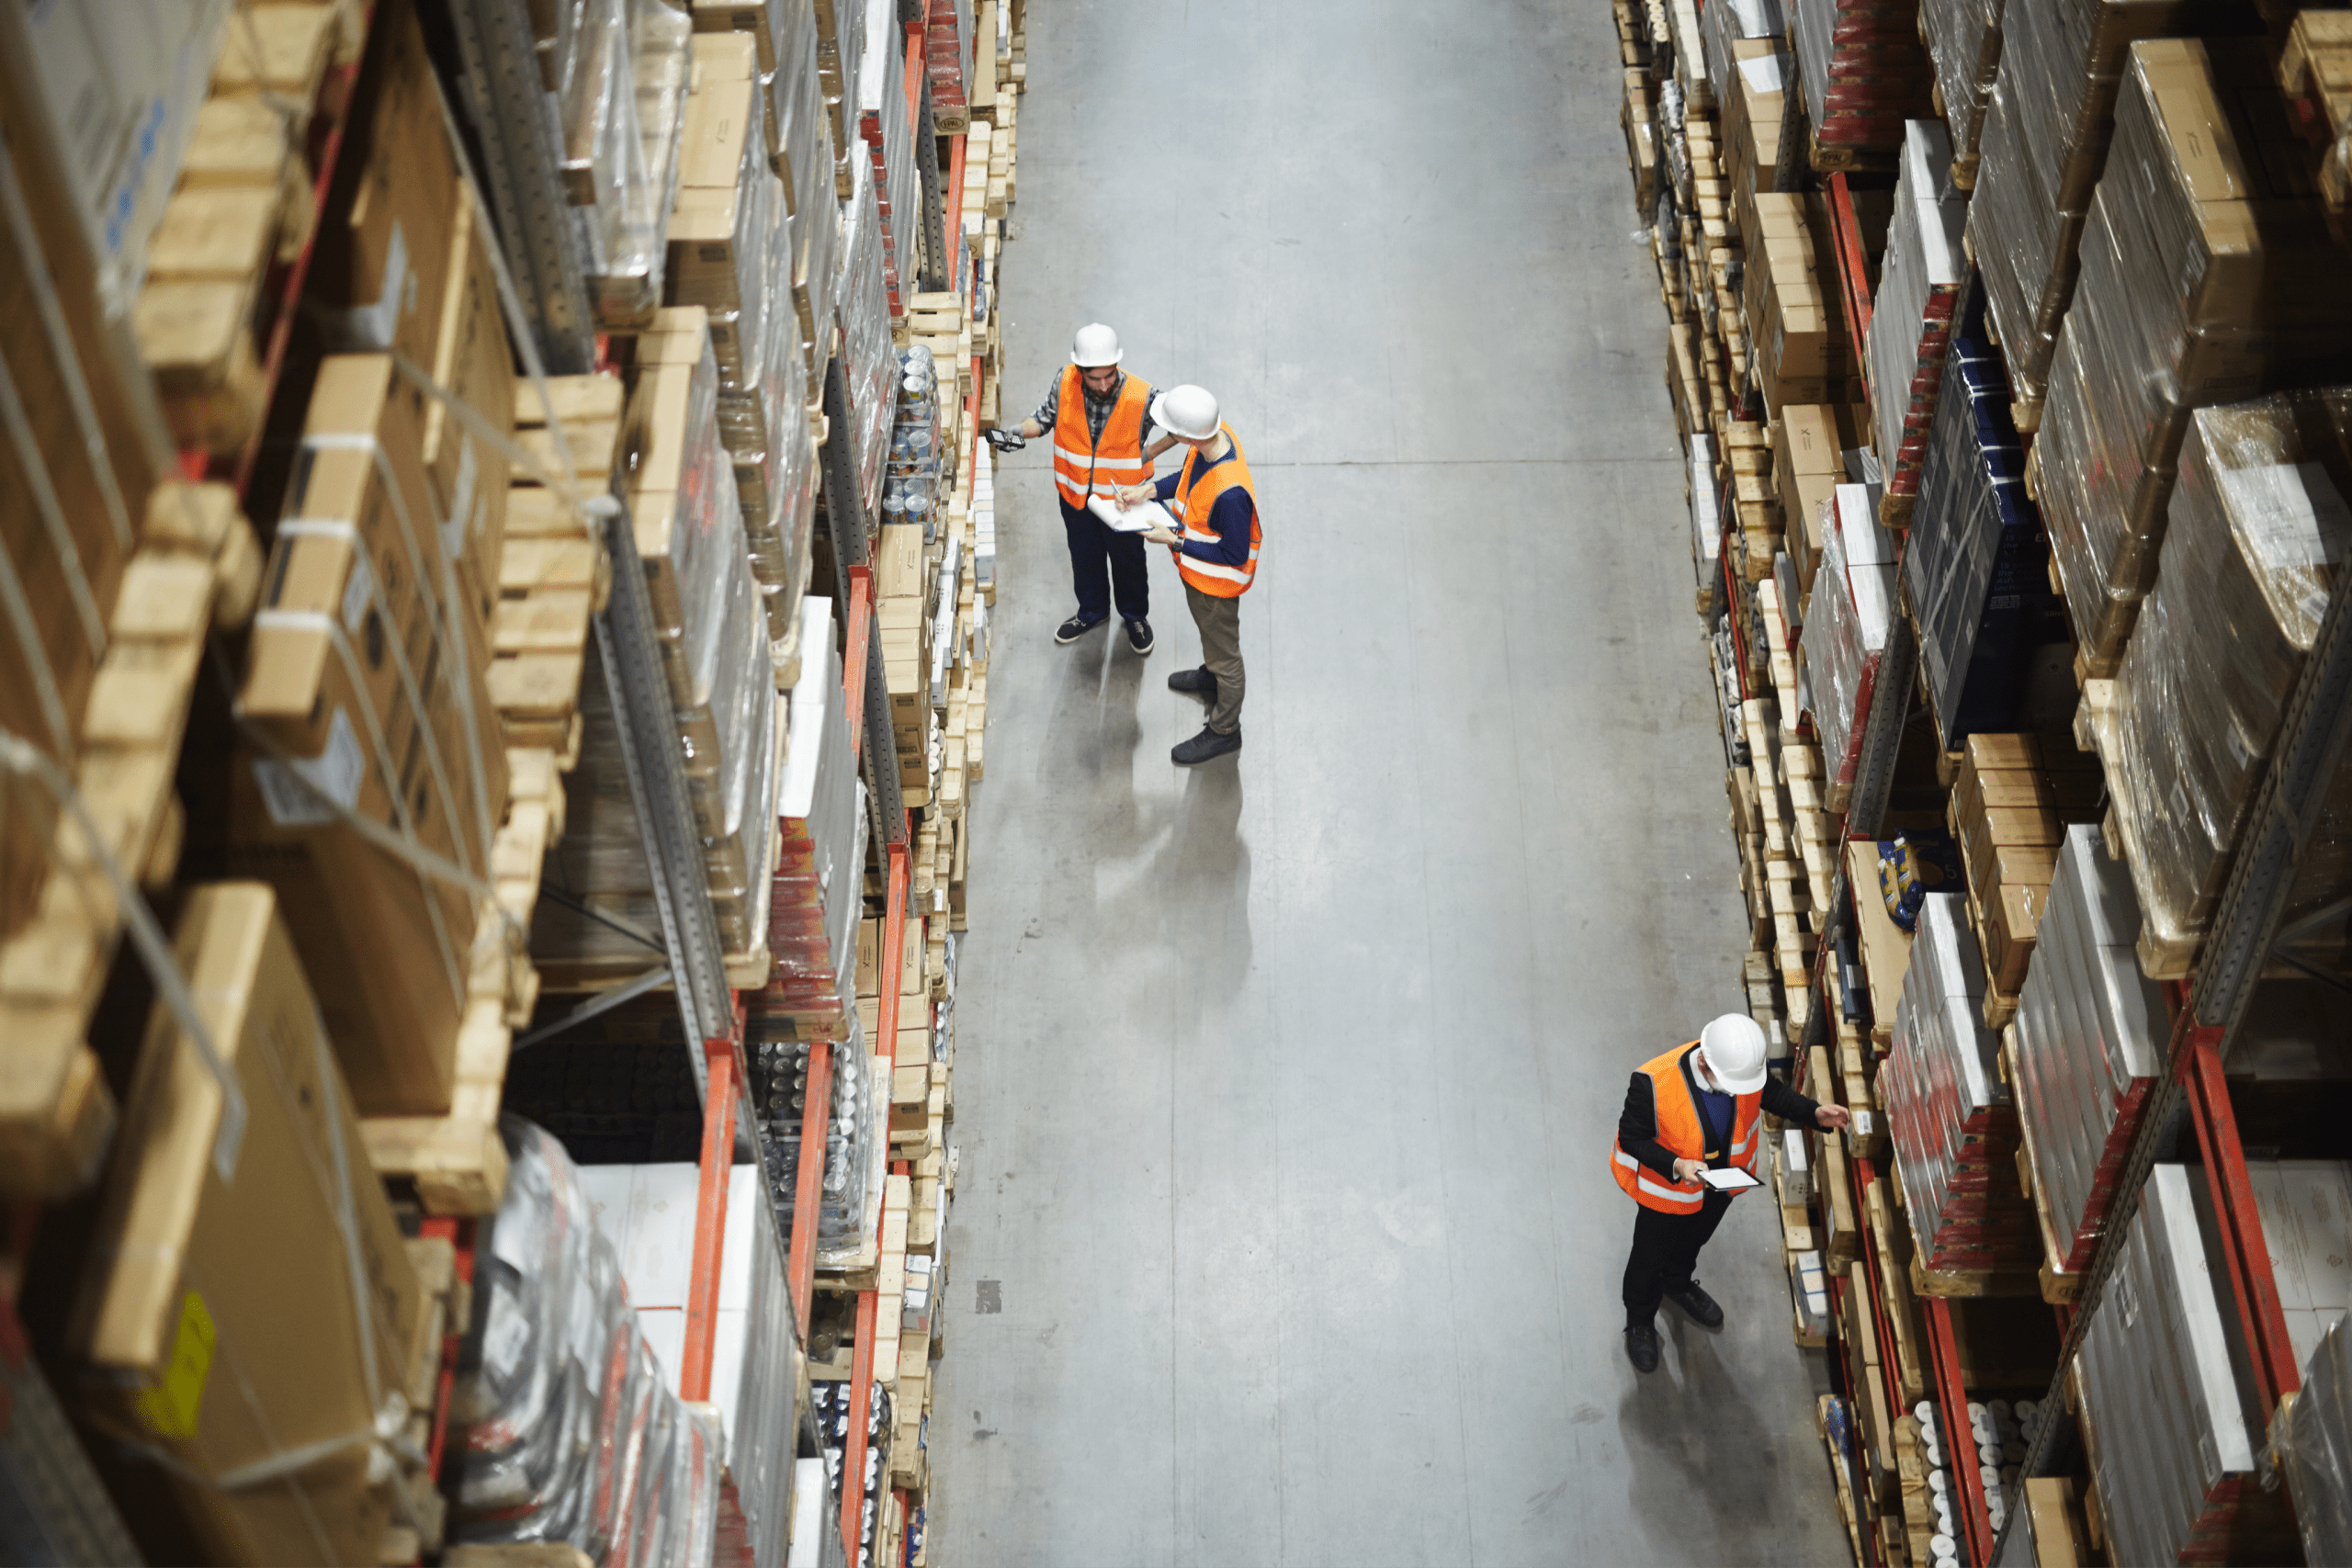 How we built an intelligent stock management system blog post hero image, workers in warehouse